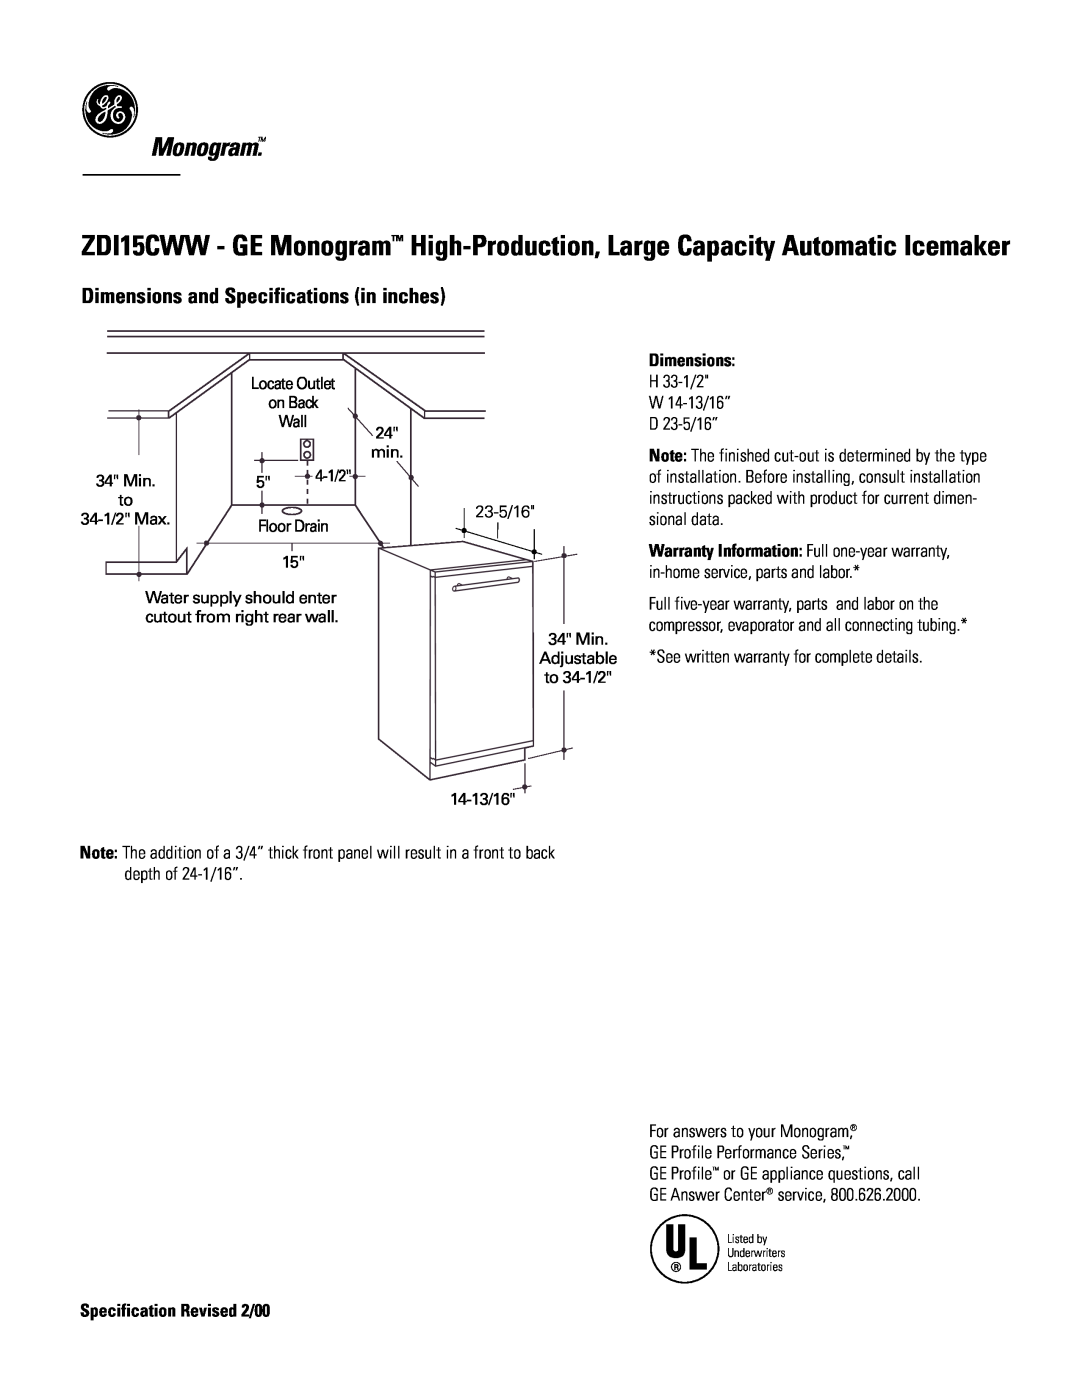 GE Monogram ZDI15CWW dimensions Monogram, Dimensions and Specifications in inches, Specification Revised 2/00 